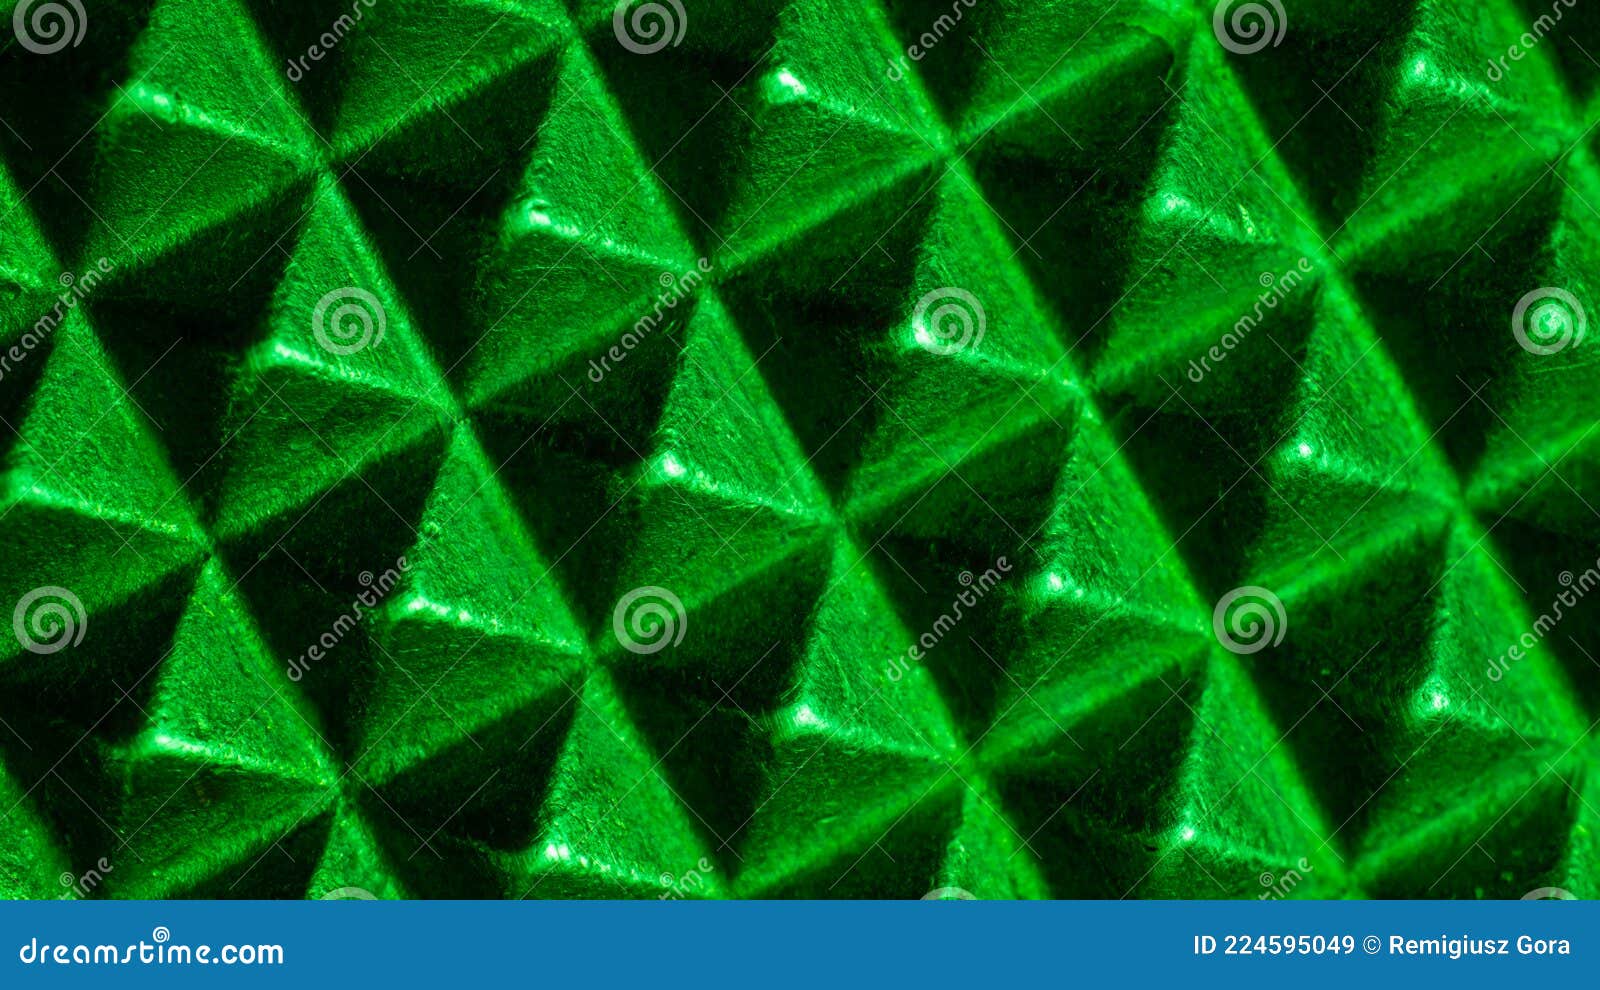 green texture macro photo of the pyramids on tapete